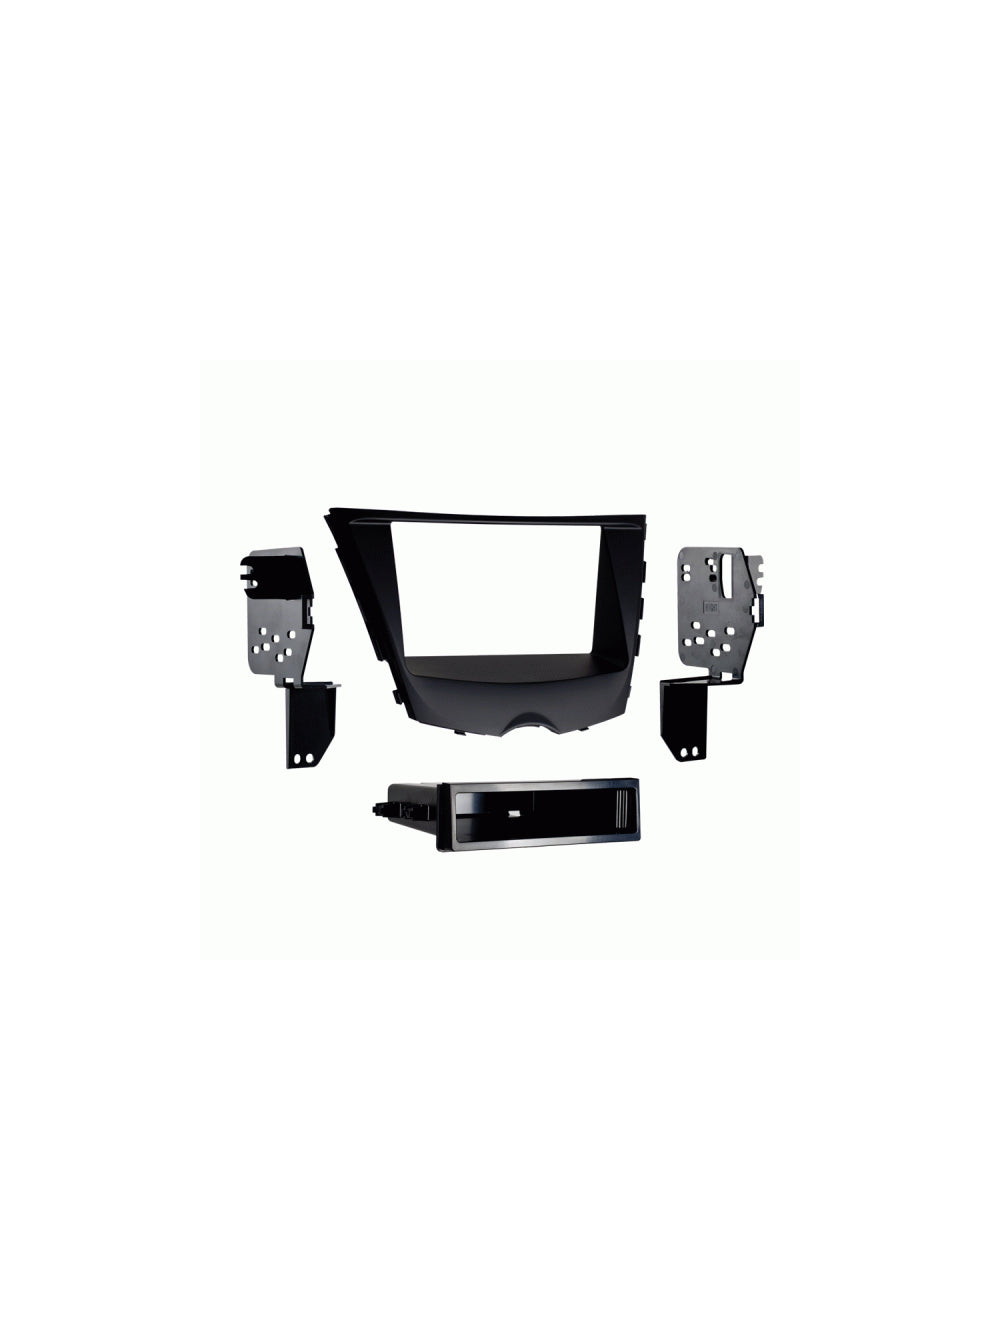 Metra 99-7350B Single/Double DIN Installtion Kit for 2012-Up Hyundai Veloster ISO with Pocket